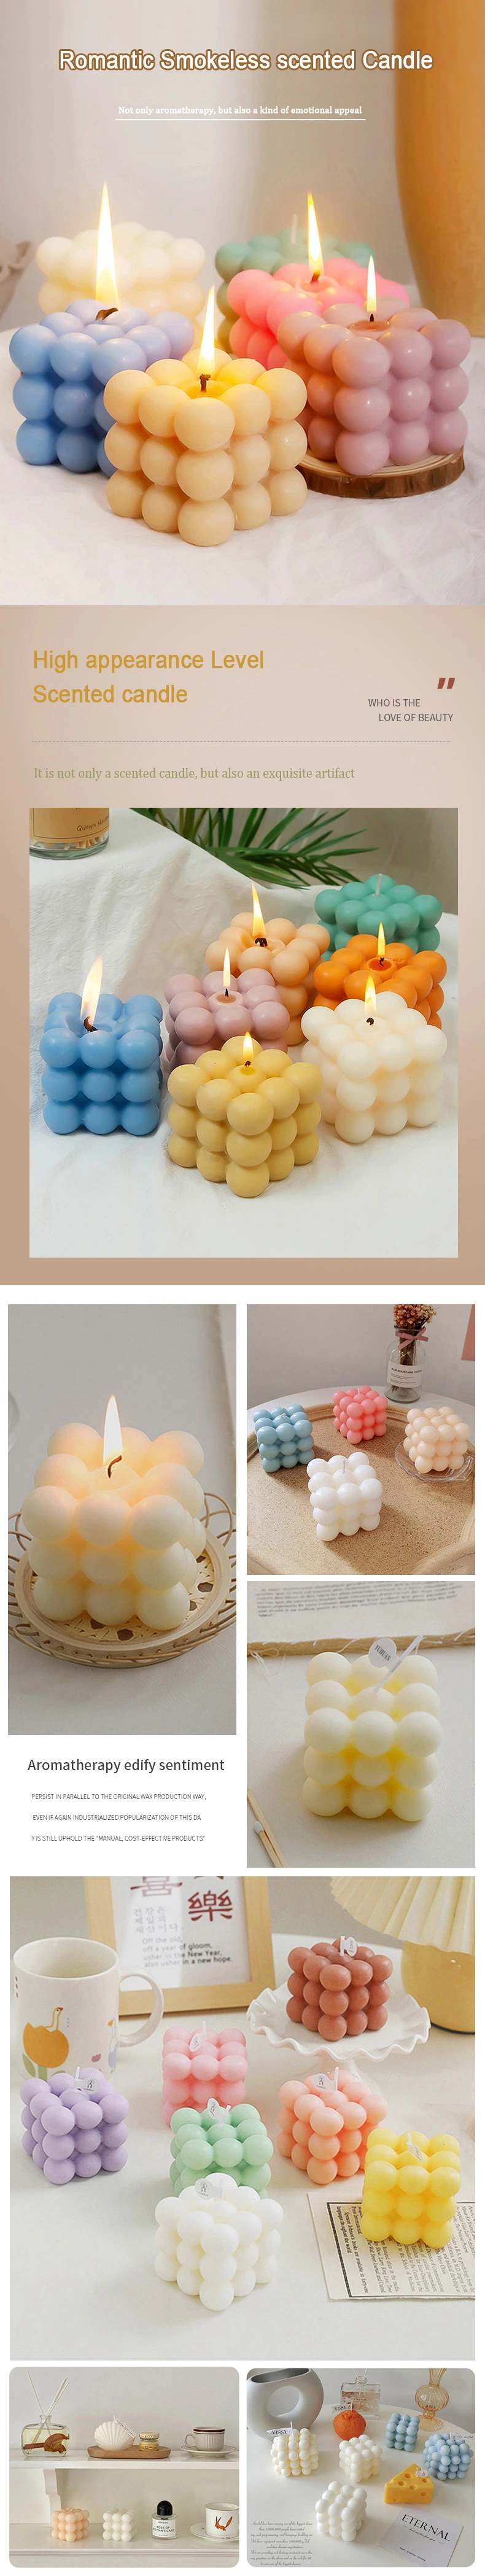 Smokeless Soybean Wax Colorful Home Decoration Lighting Aromatherapy Use Scented Candles in Crystal Glass Jar Wholesale Luxury Natural Handmade Scented Candle